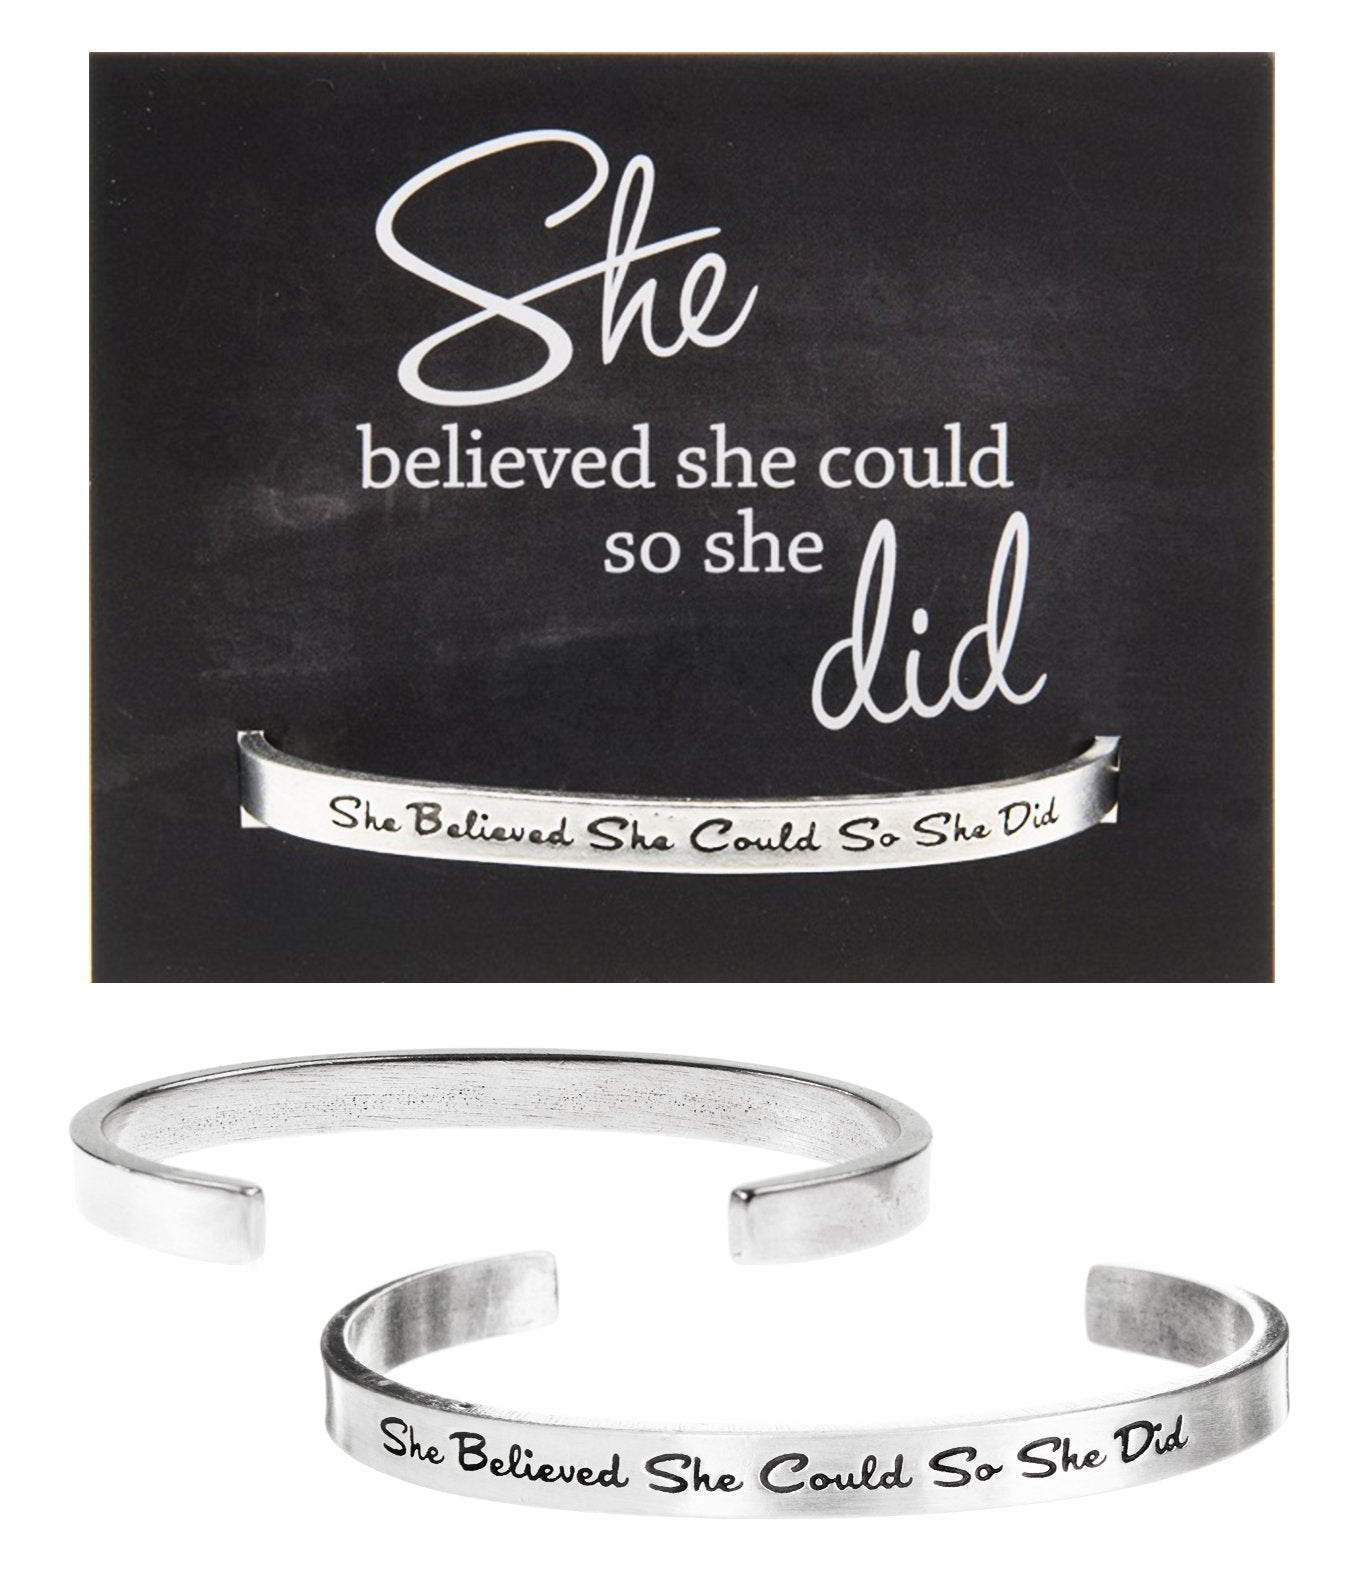 &quot;She believed she could so she did&quot; Quotable Cuff on She Believed She Could Backer Card